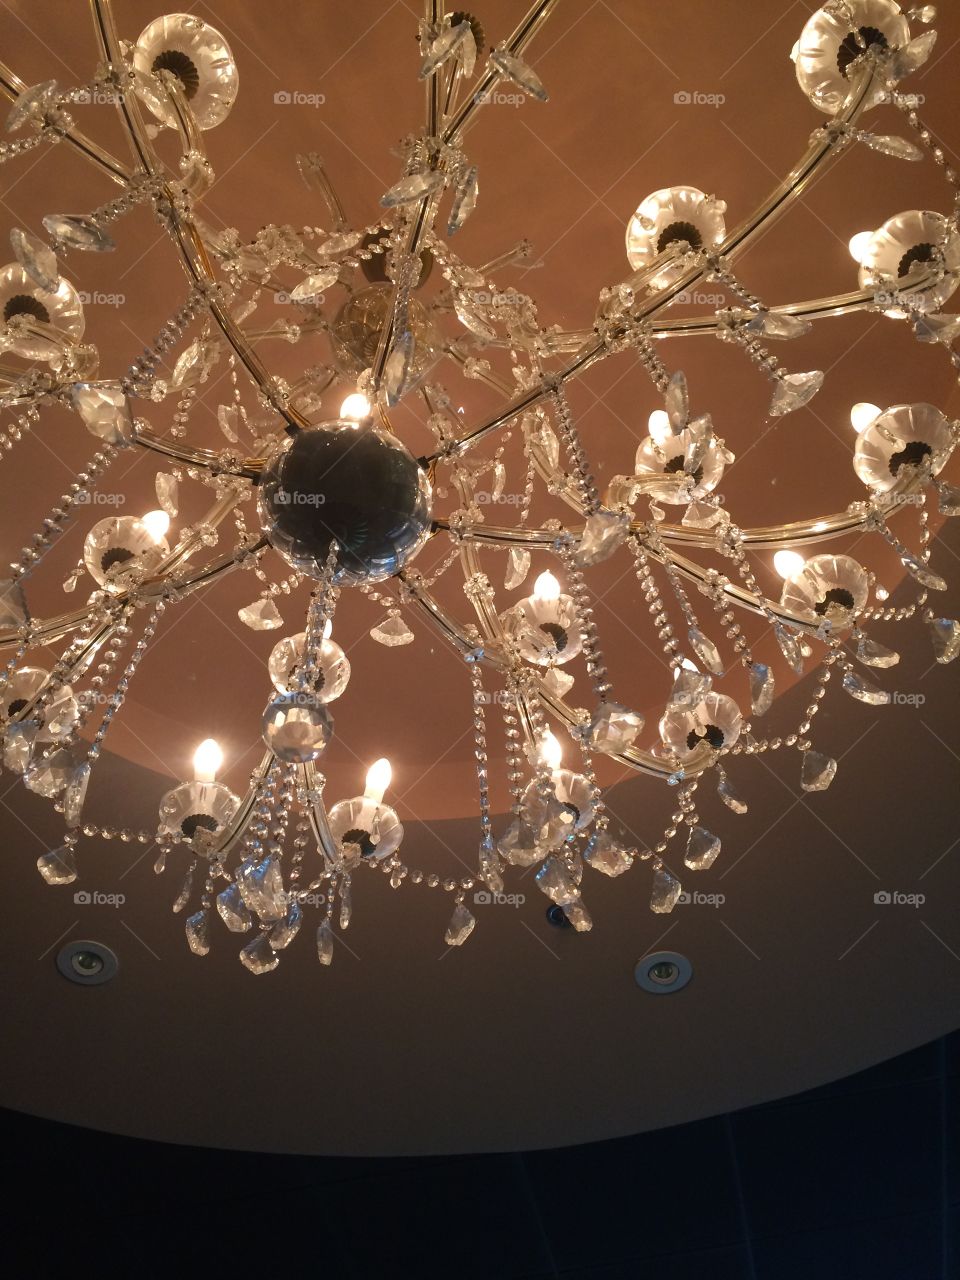 Chandeliers make any moment magical.